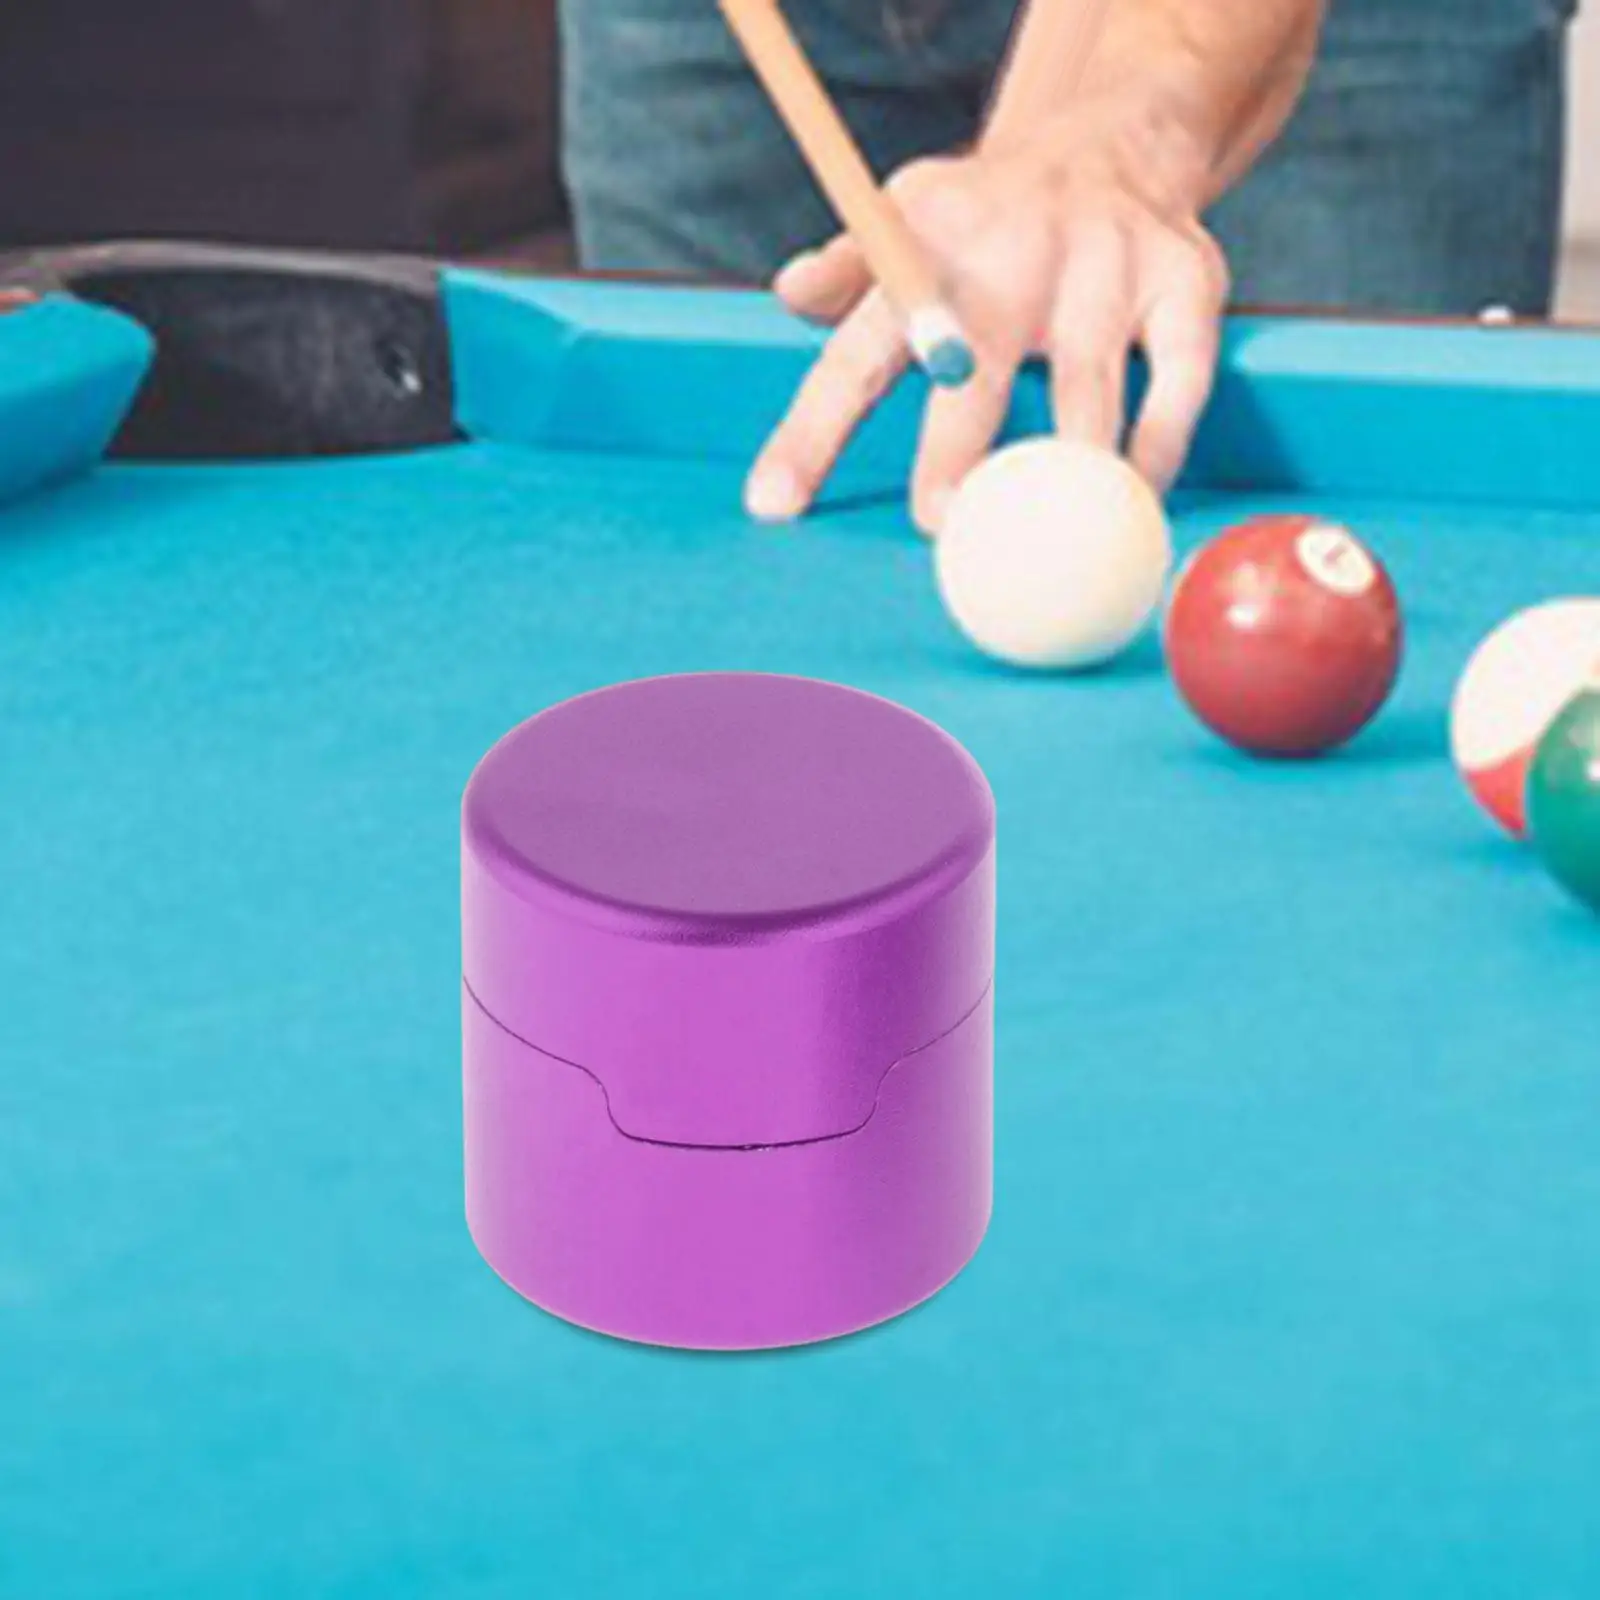 Pool Cue Chalk Holder Round Shaped Aluminum Alloy Portable Easy to Carry Carrier Case Box Chalk Holder Billiards Accessories